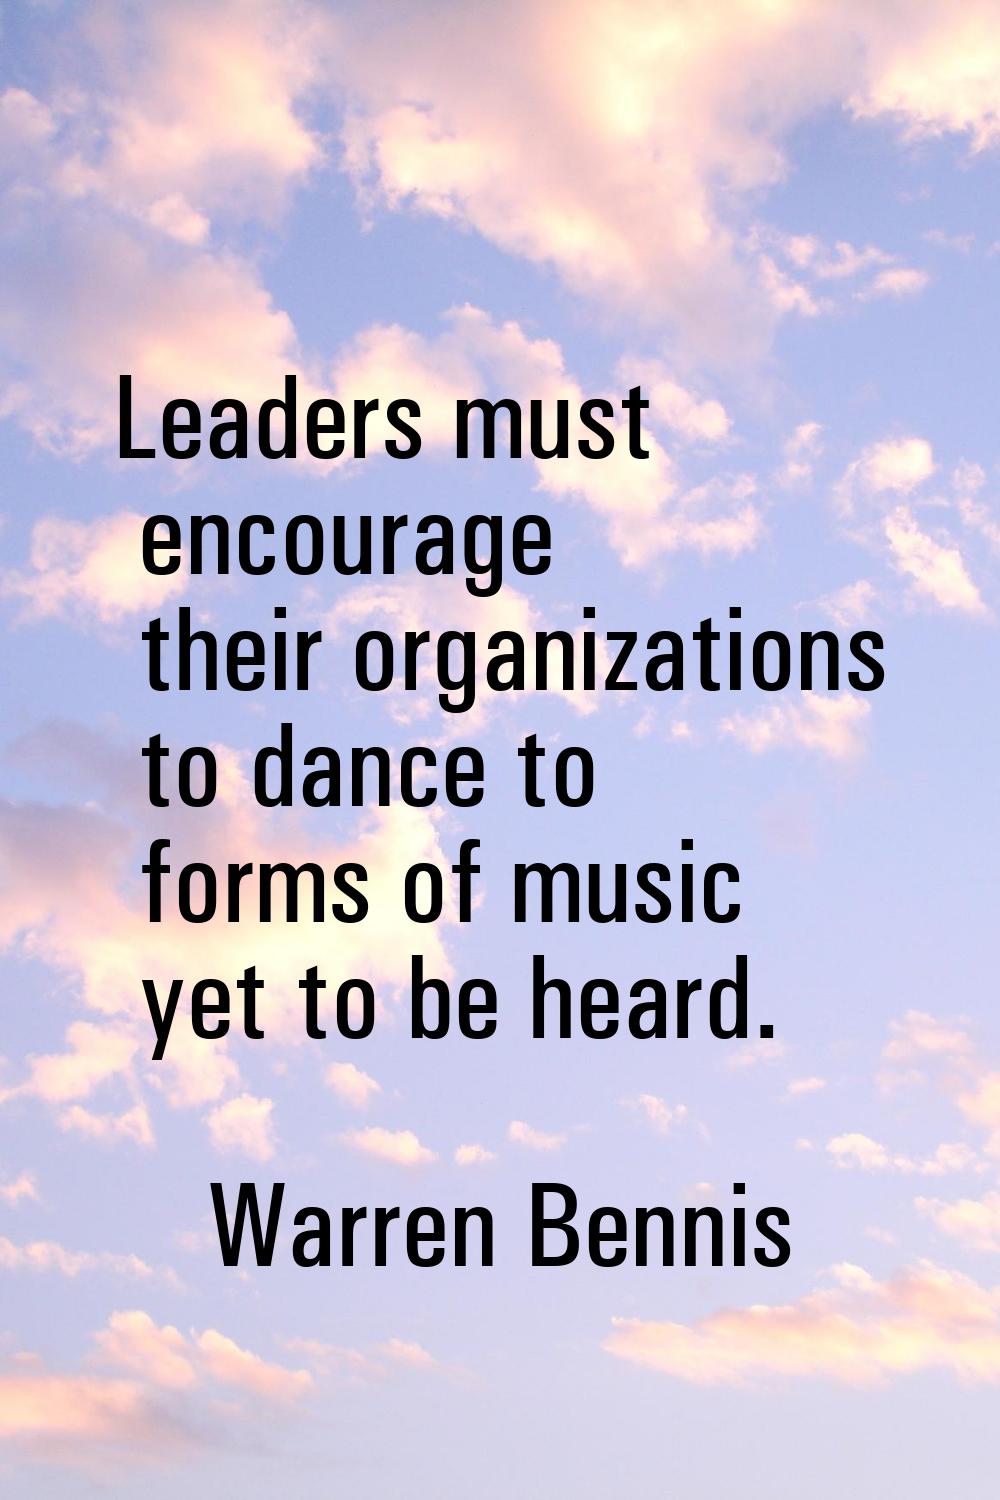 Leaders must encourage their organizations to dance to forms of music yet to be heard.